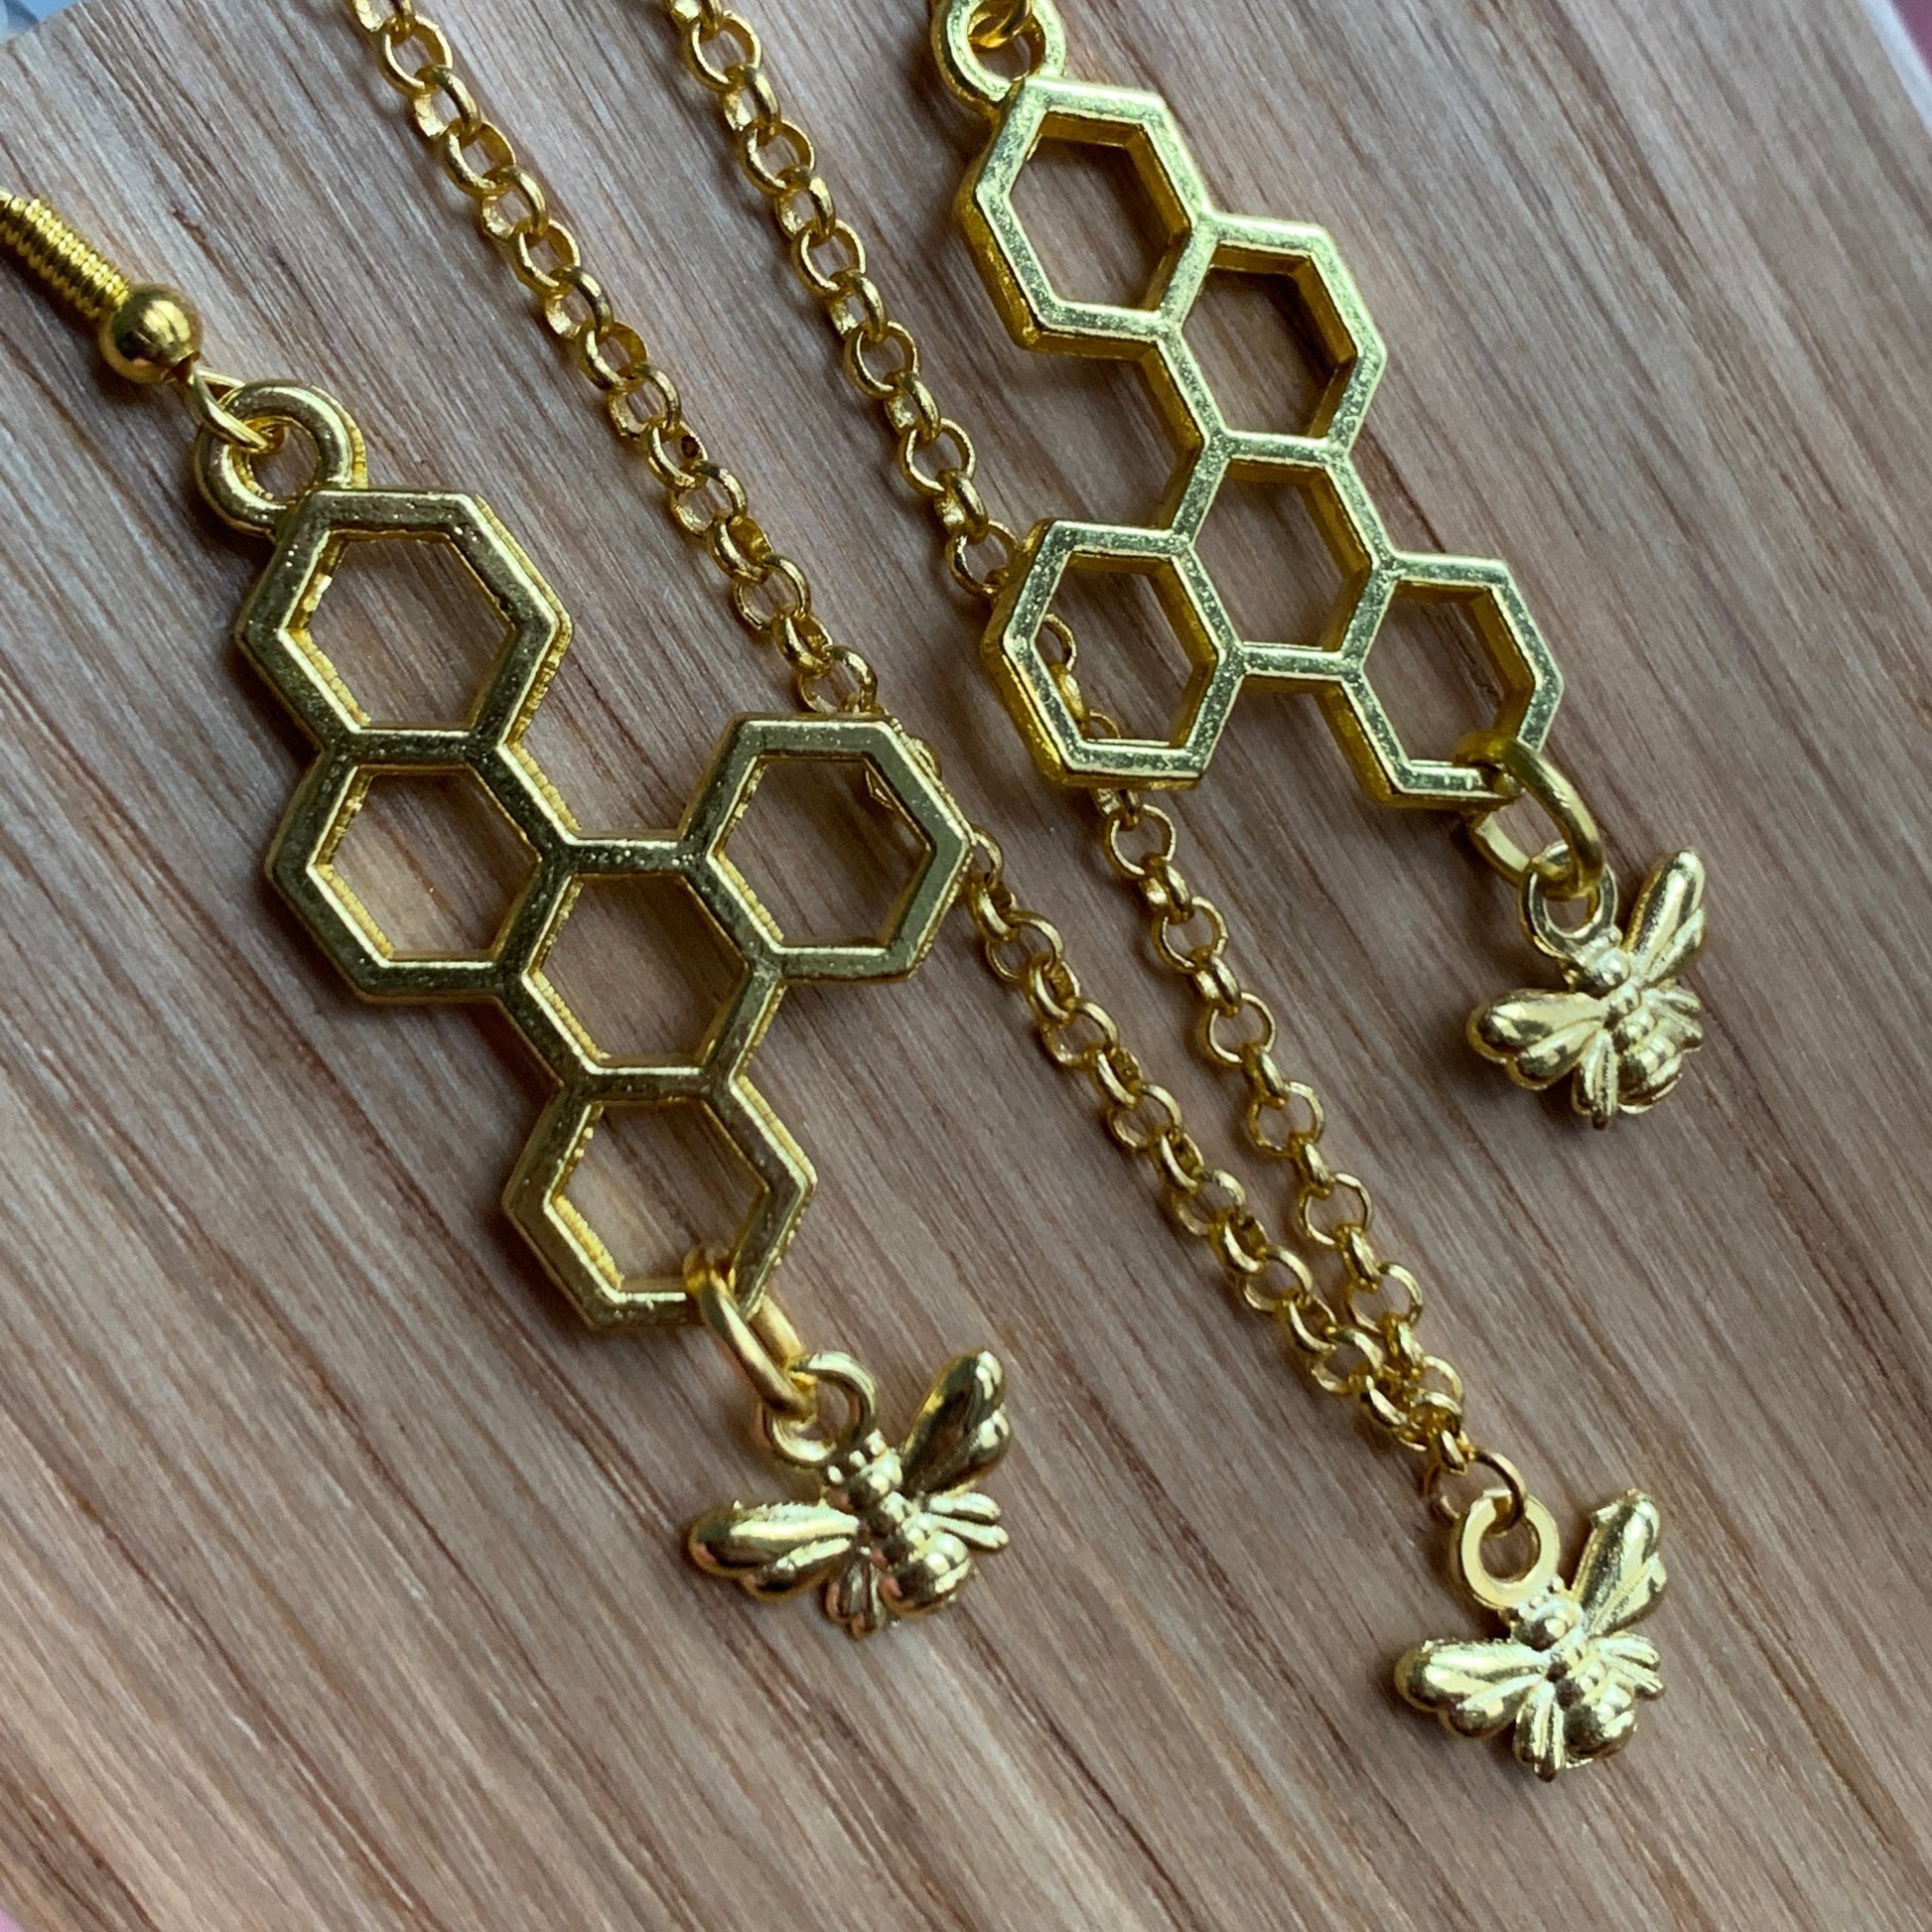 Simple Gold Bee Charm Necklace - Lxyclr Authentic